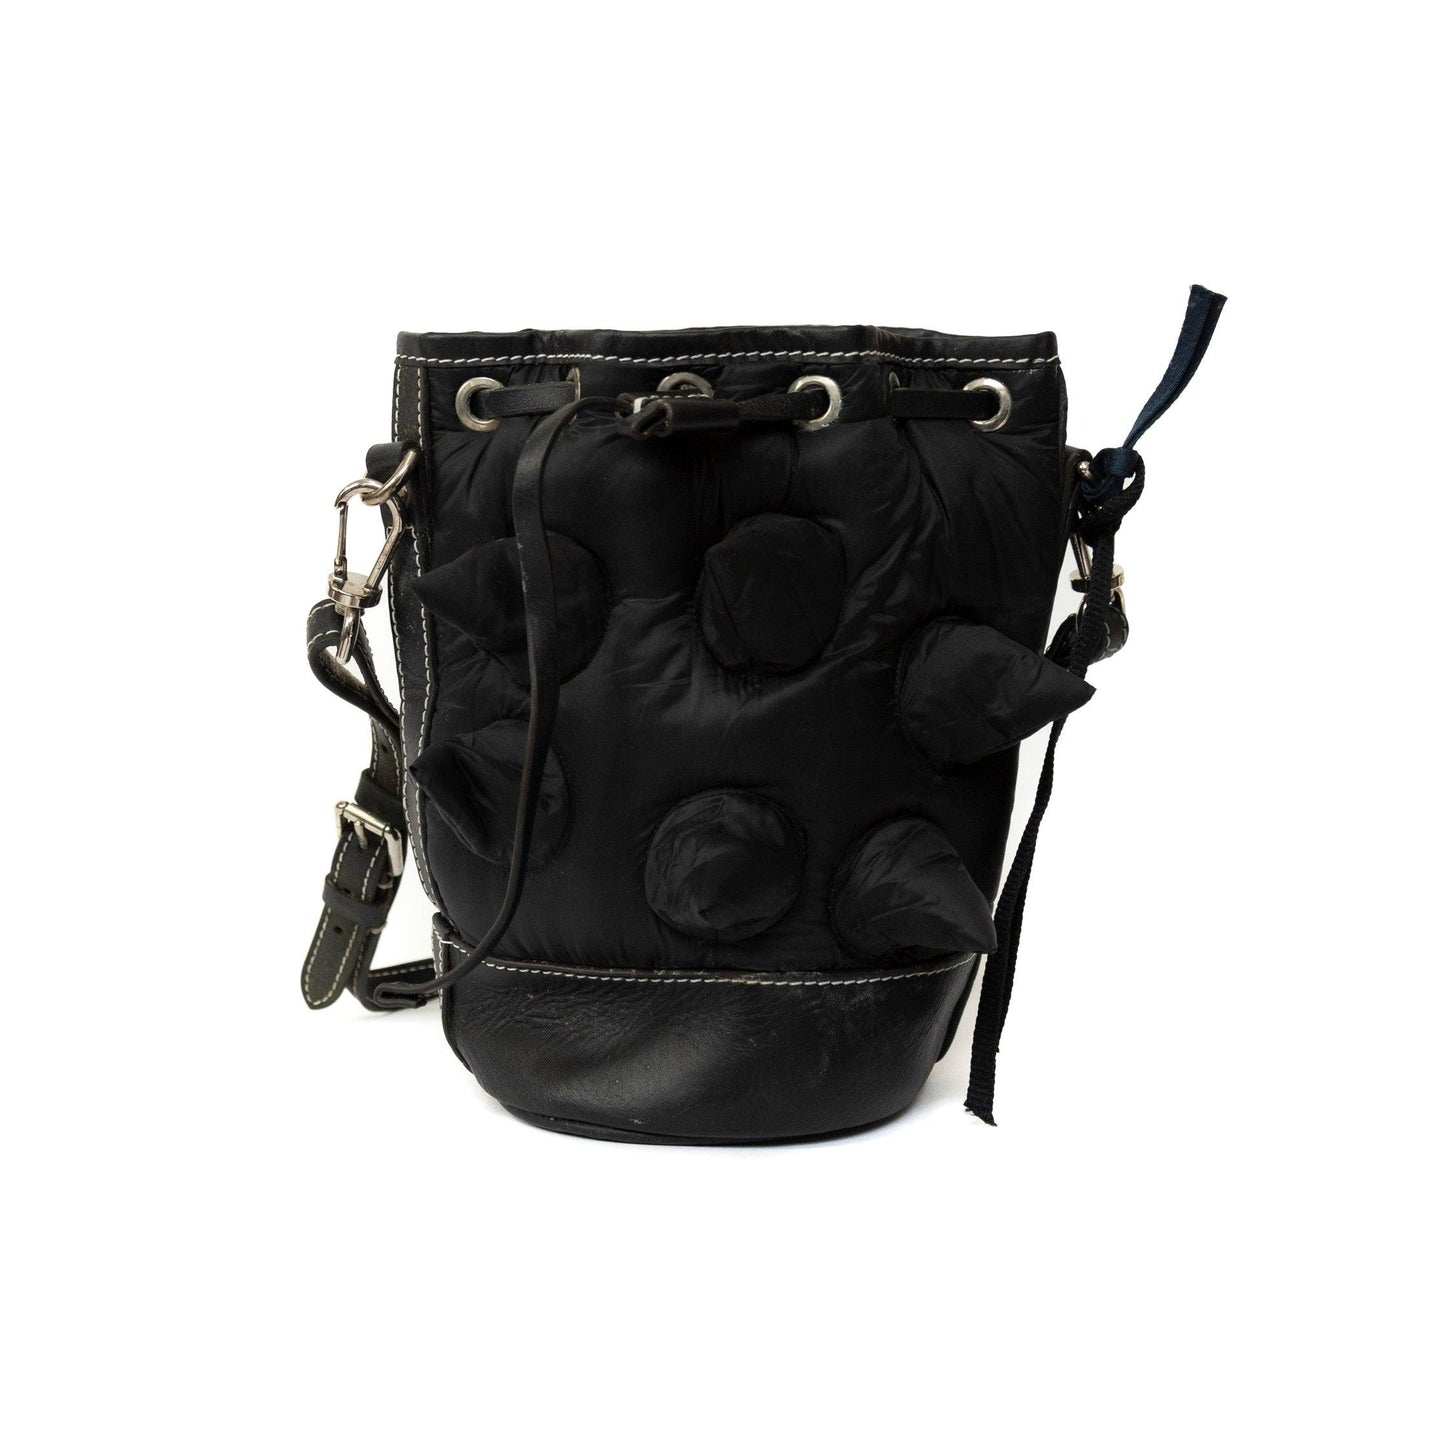 Moncler x JW Anderson "The Critter" Bucket Bag